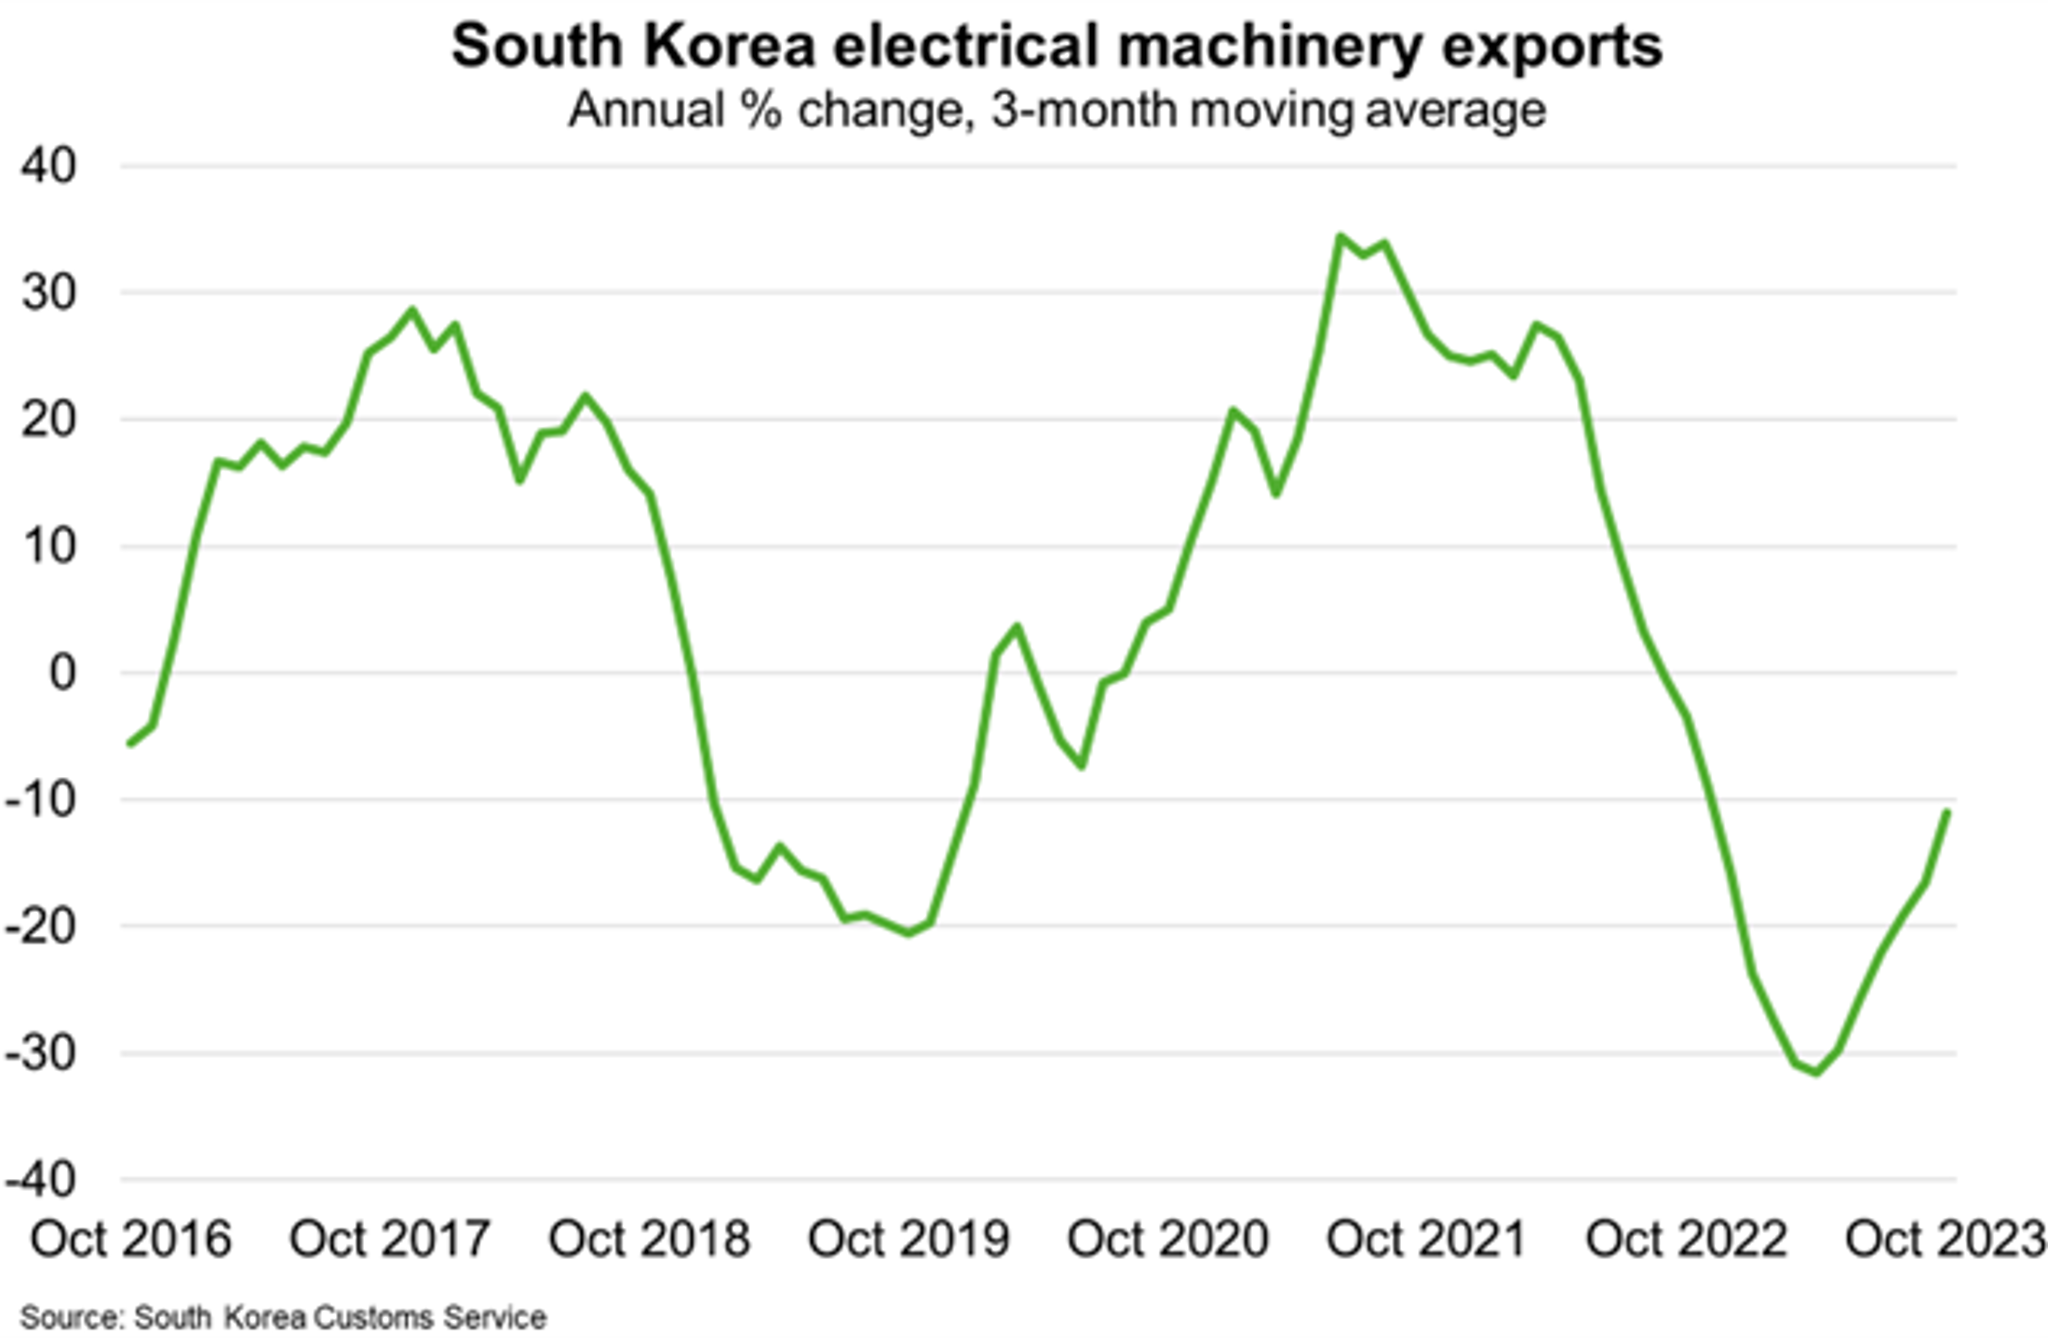 South Koreas electical machinery exports